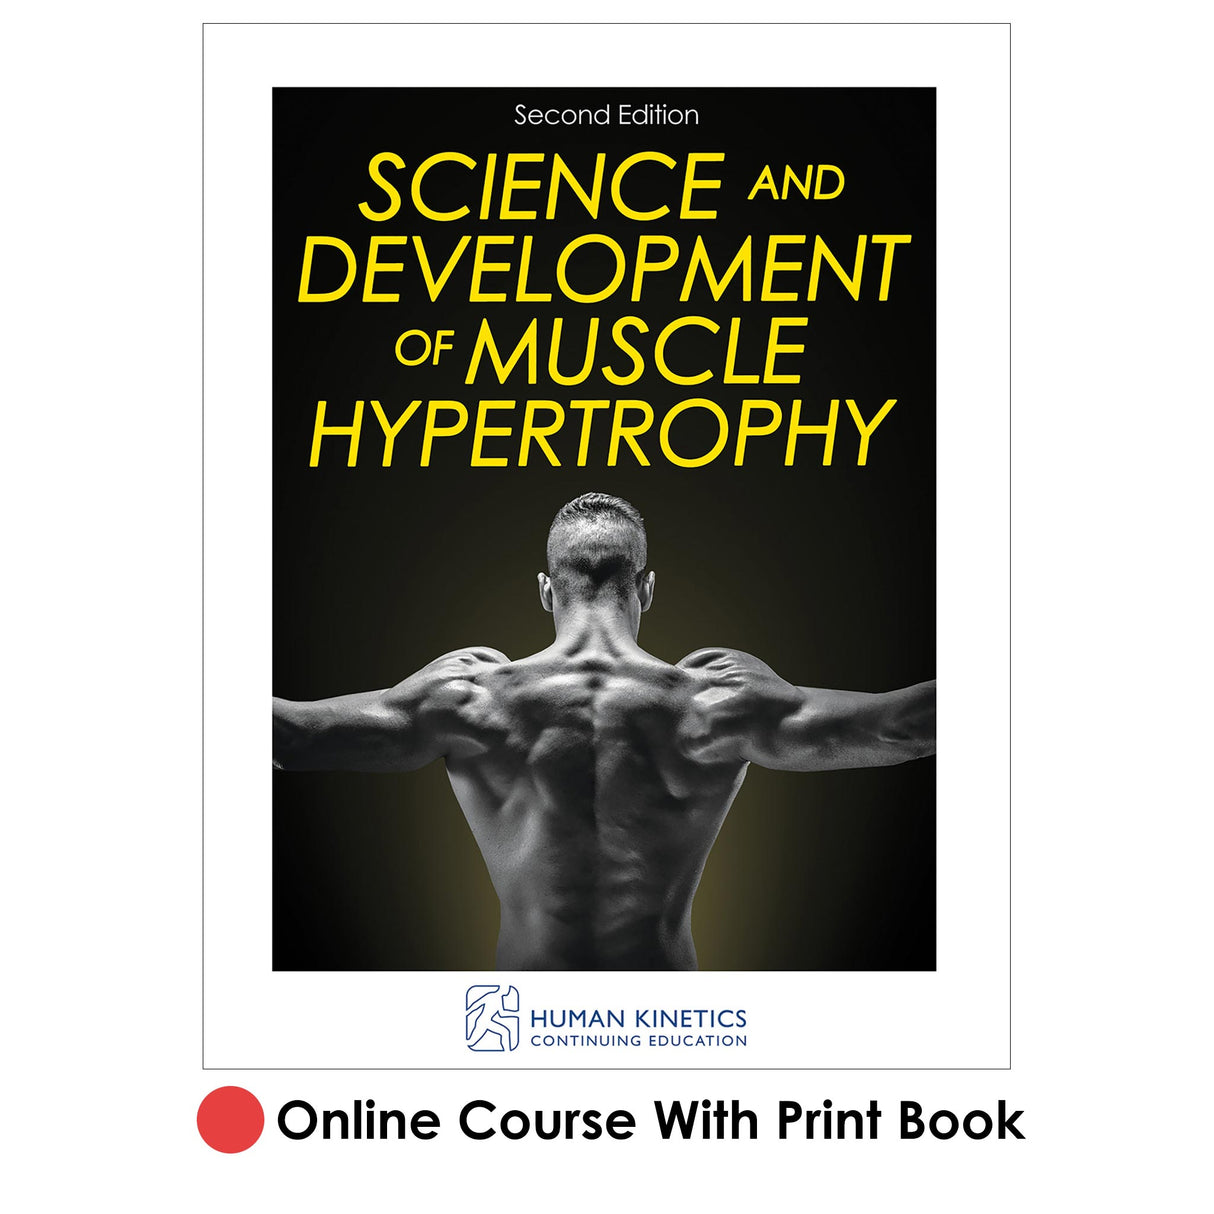 Science and Development of Muscle Hypertrophy 2nd Edition Online CE Course With Print Book